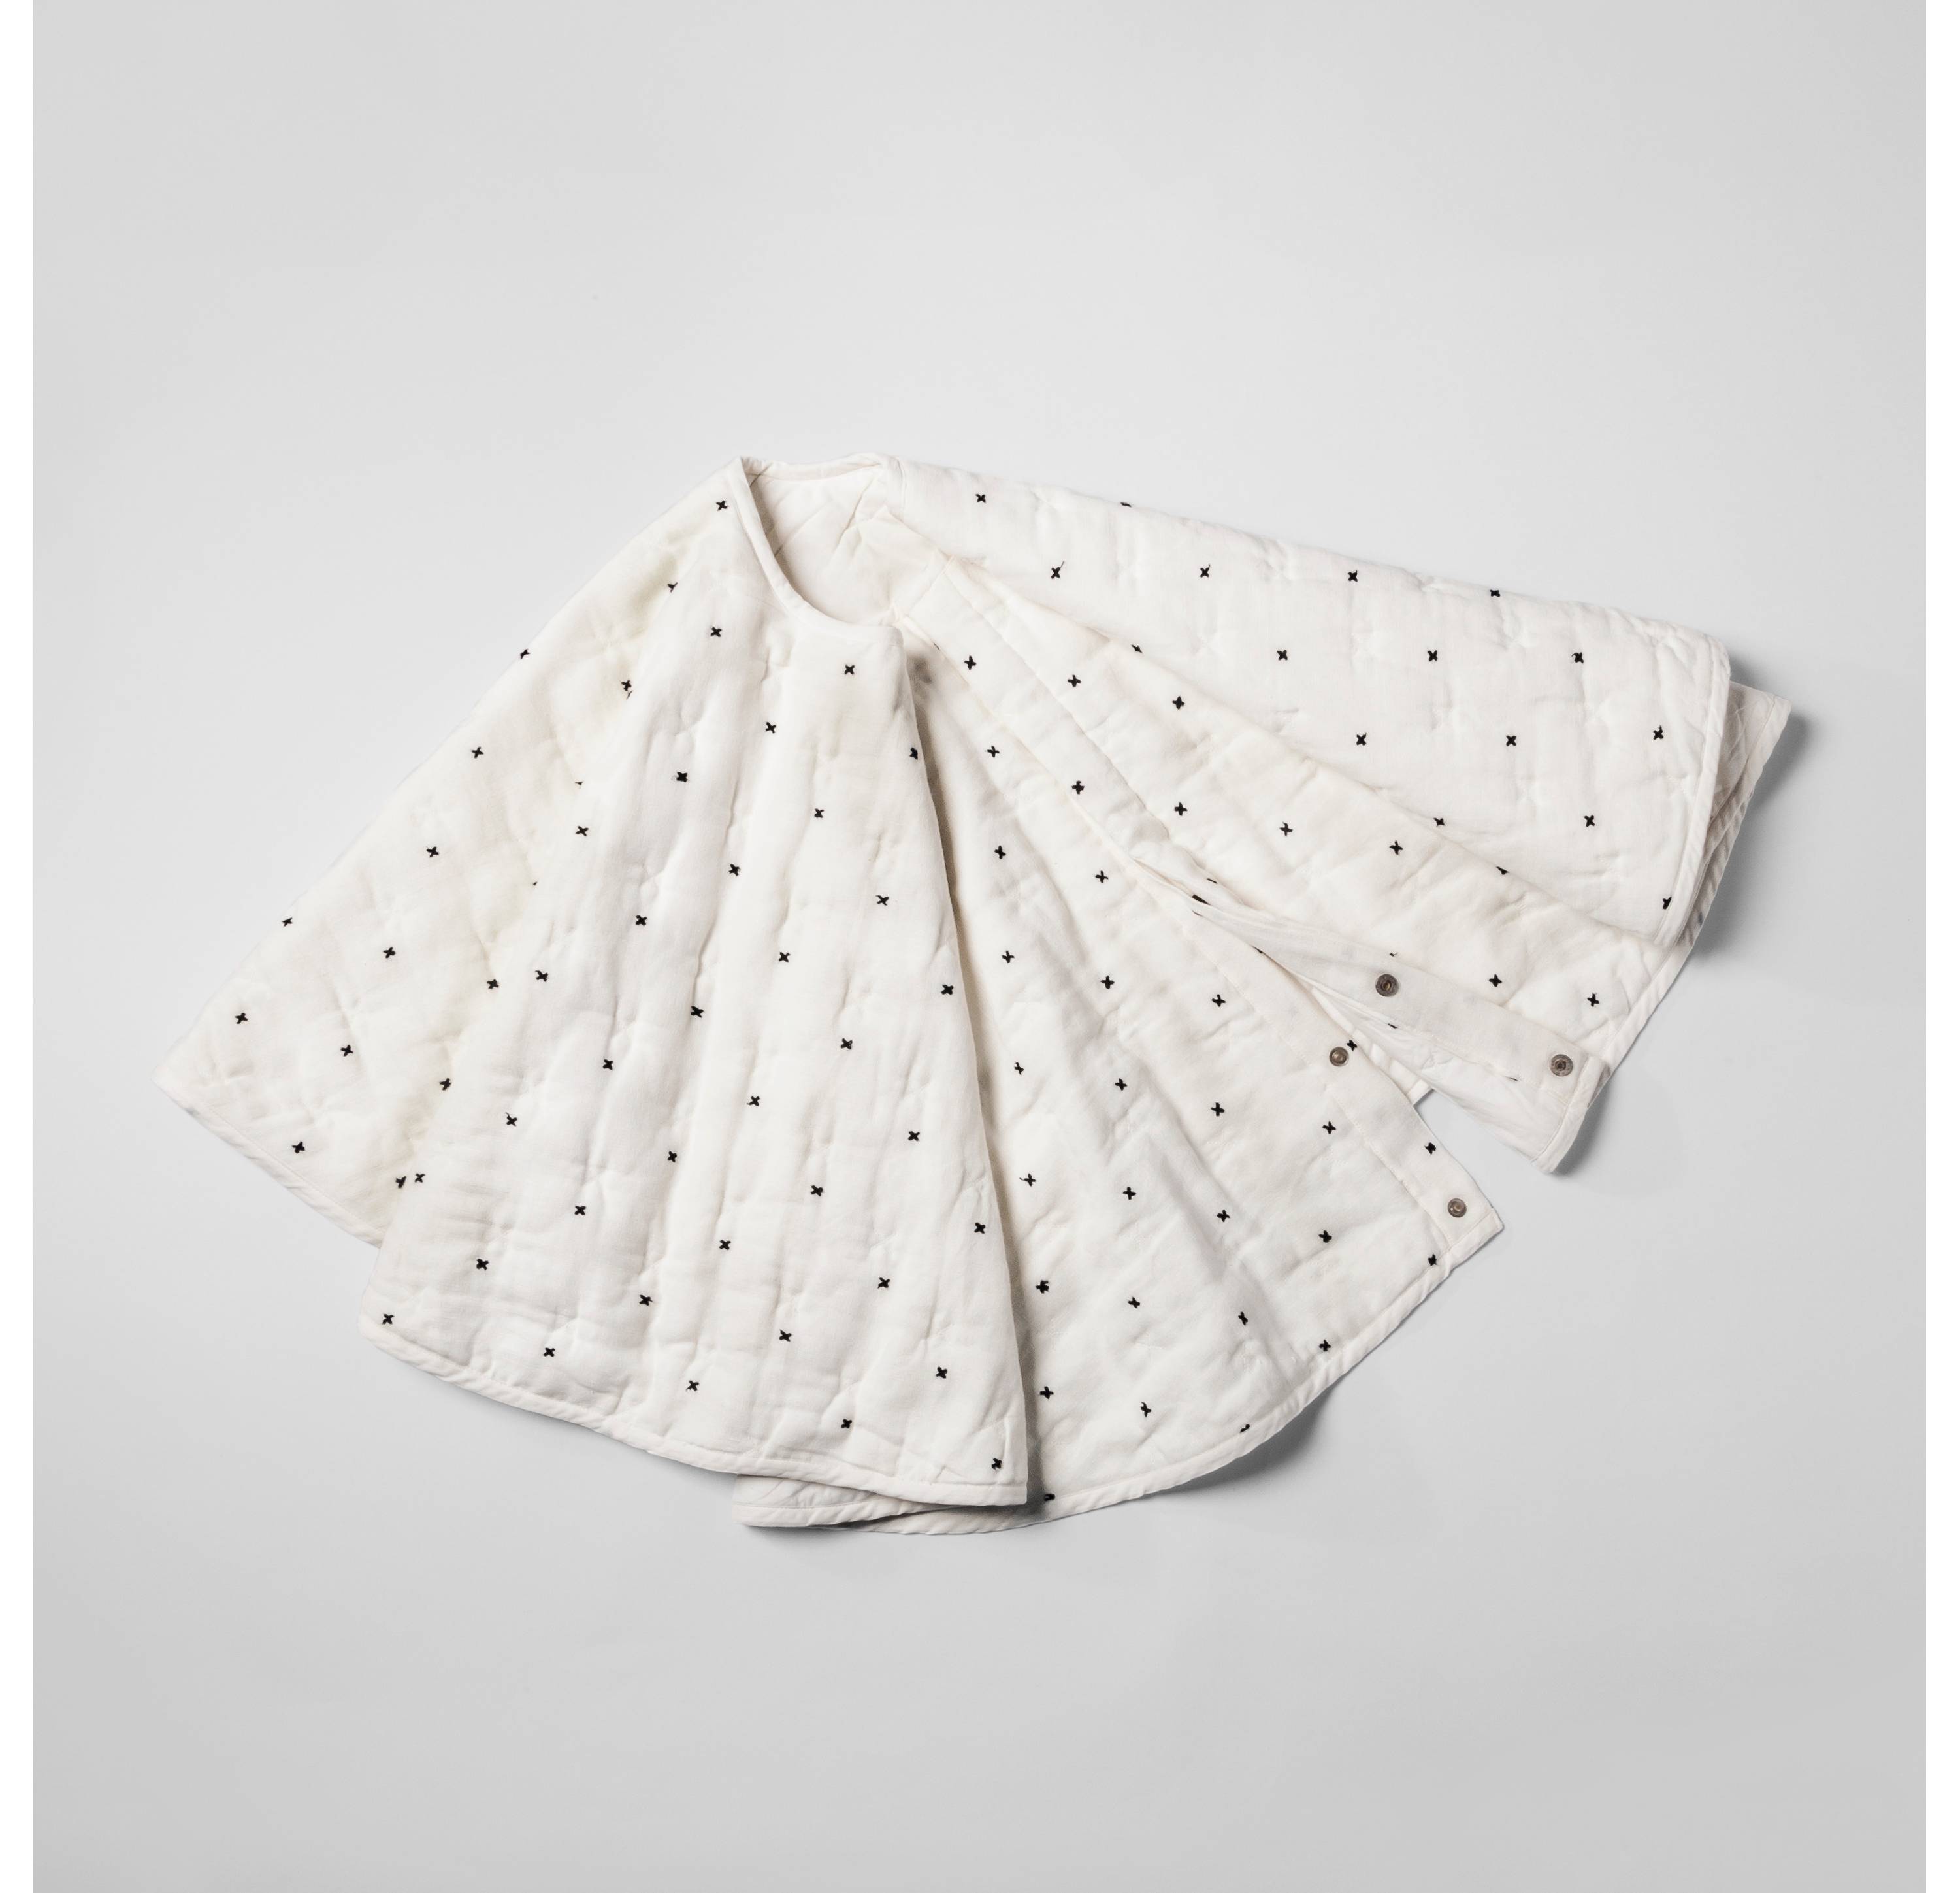 A white tree skirt with black dots on it.